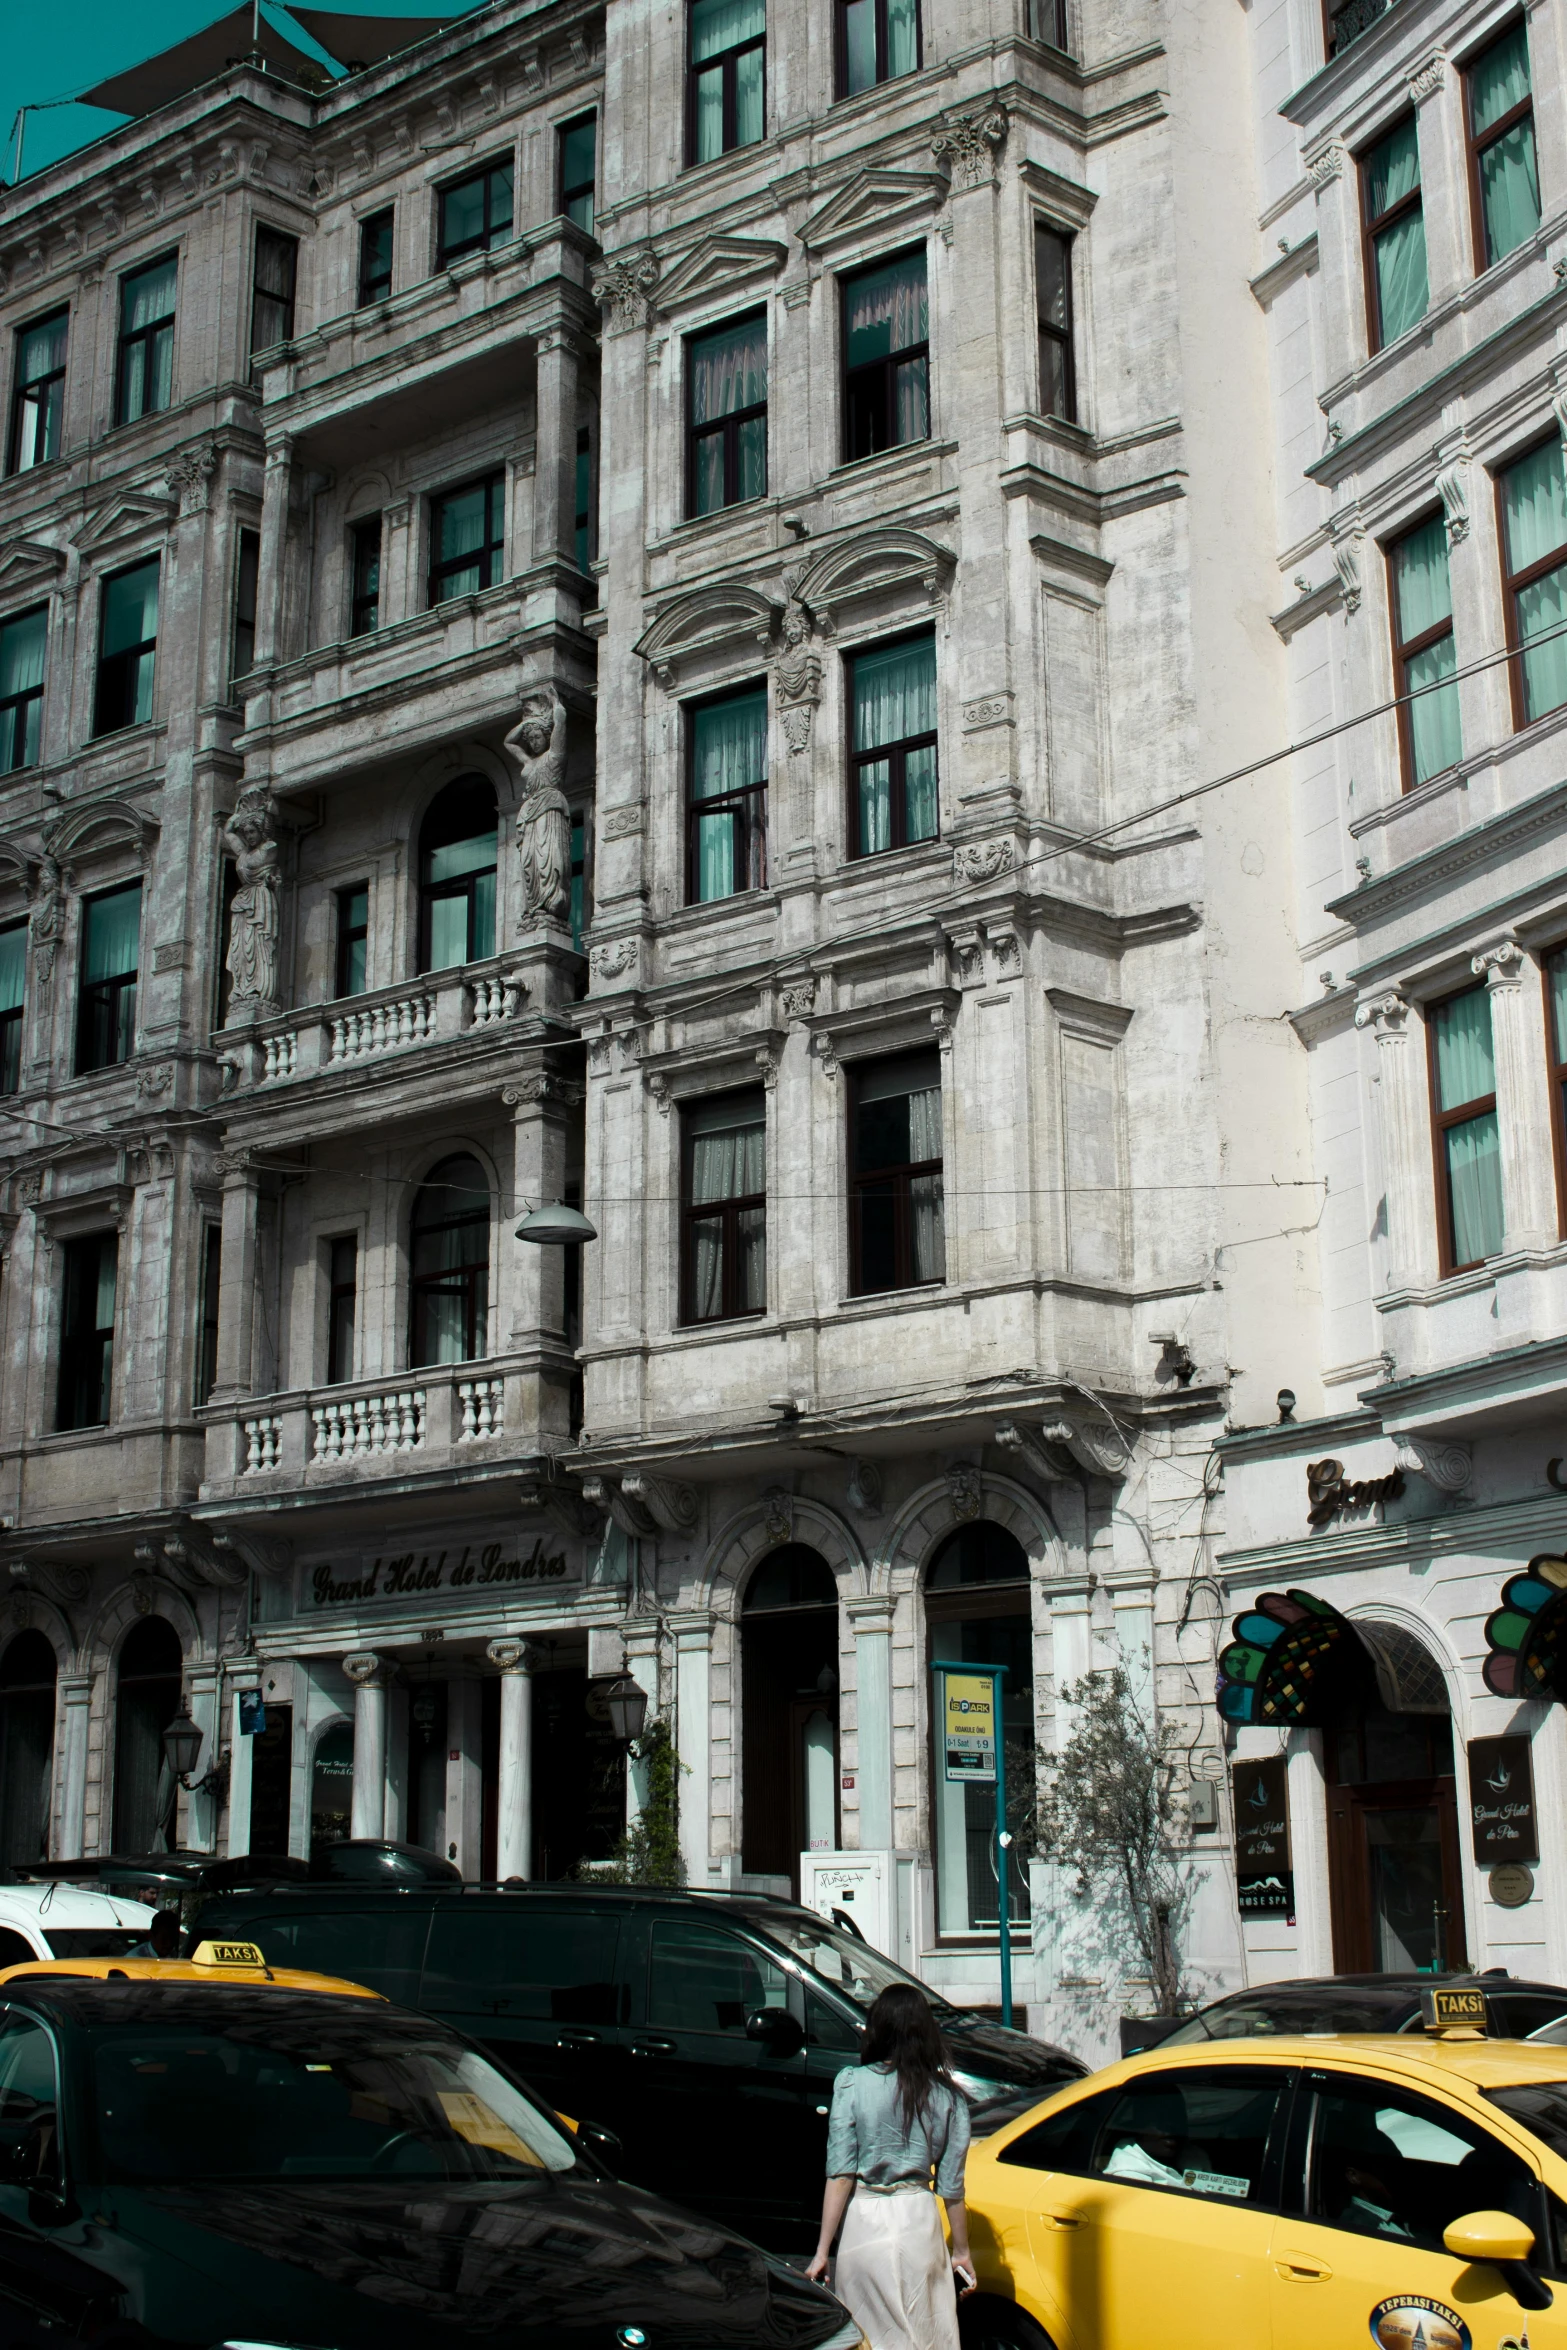 a couple of cars that are parked in front of a building, inspired by Mihály Munkácsy, art nouveau, hotel, kazakh empress, stone facade, street elevation